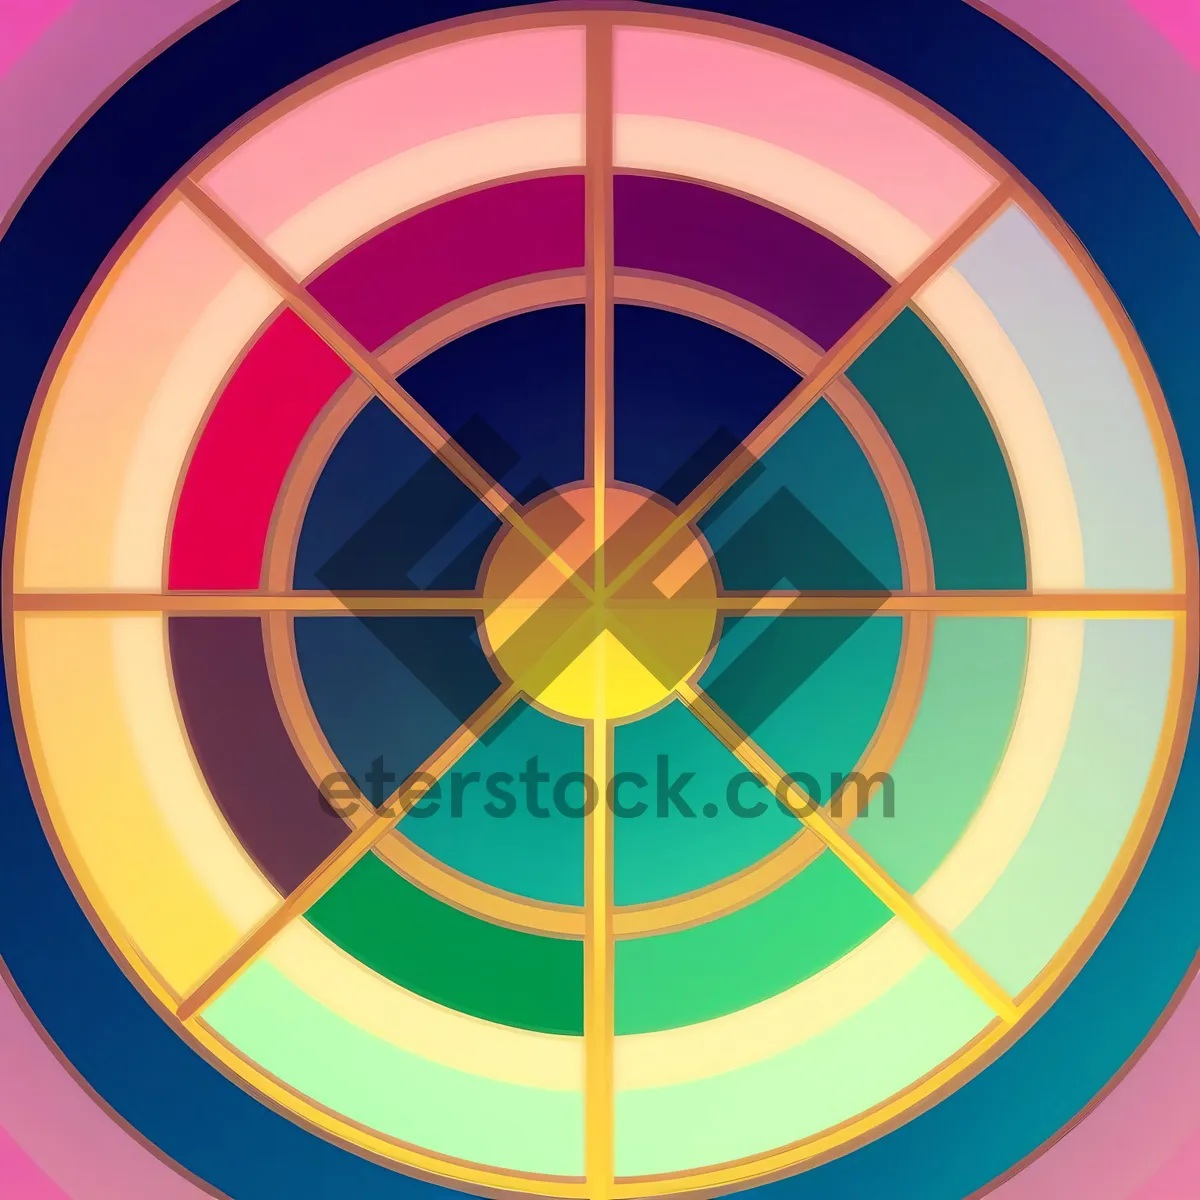 Picture of Harmony Circle: Radiant Healing Art with Hippie Design